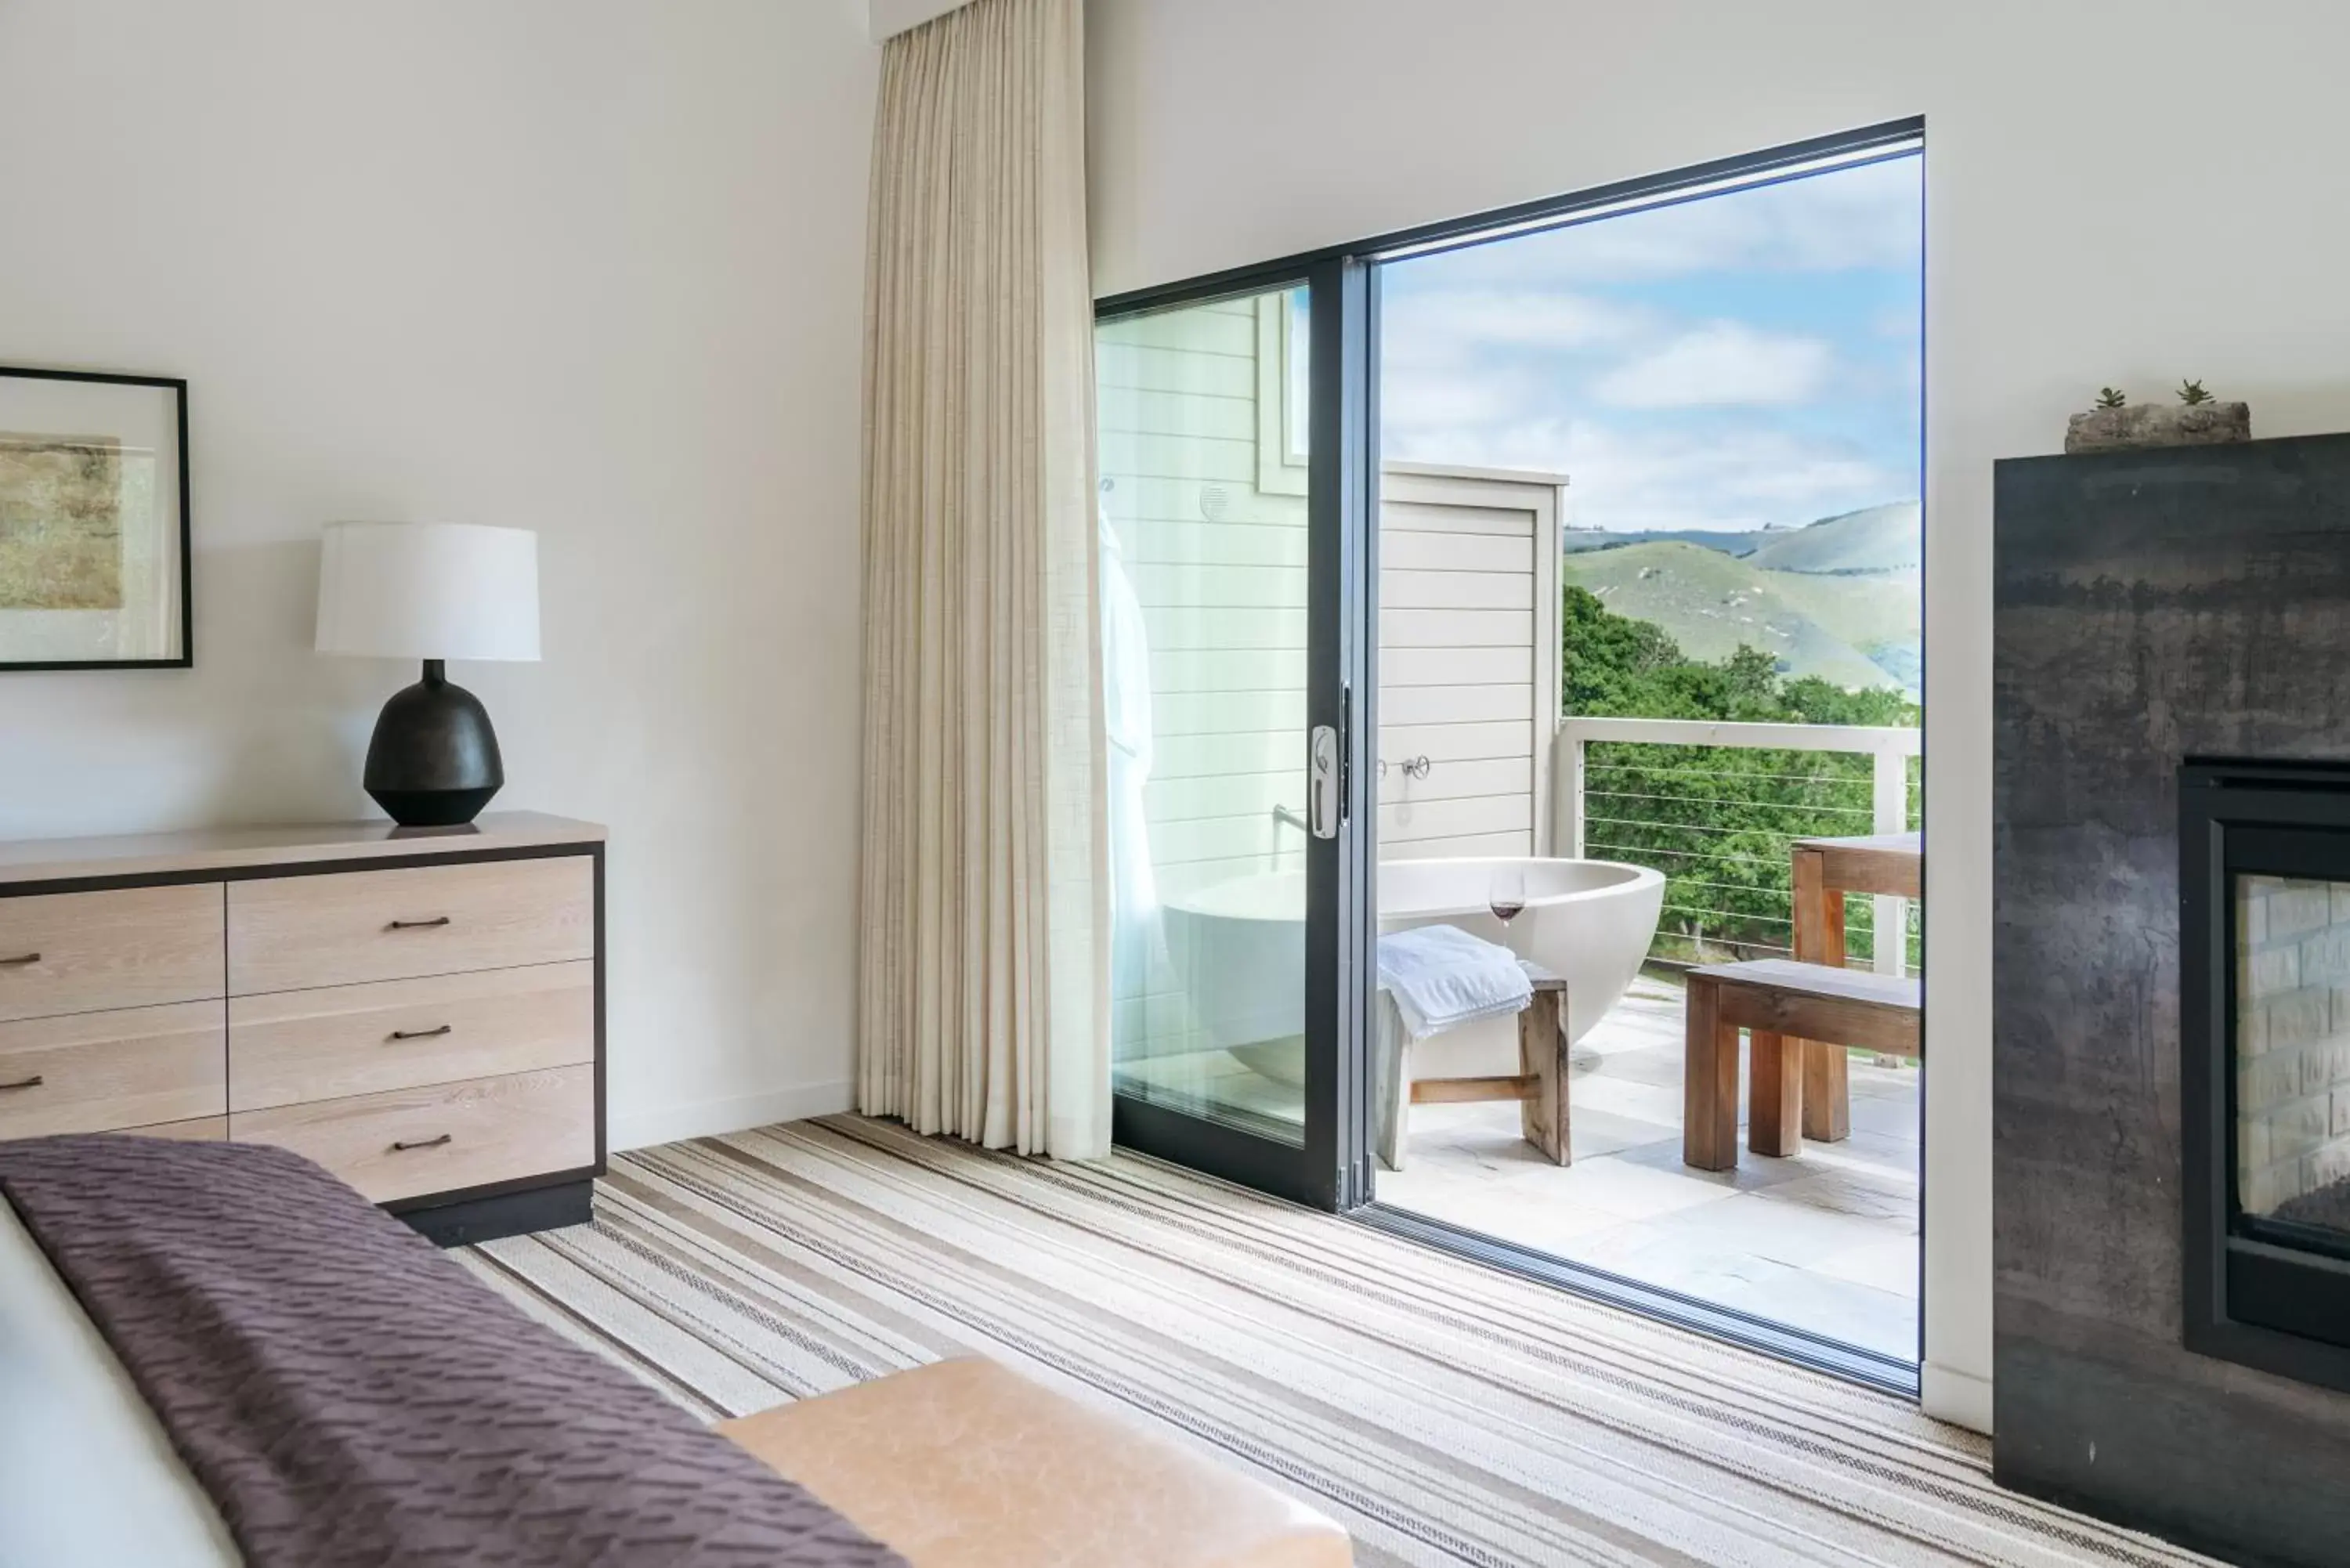 Bedroom in Carmel Valley Ranch, in The Unbound Collection by Hyatt